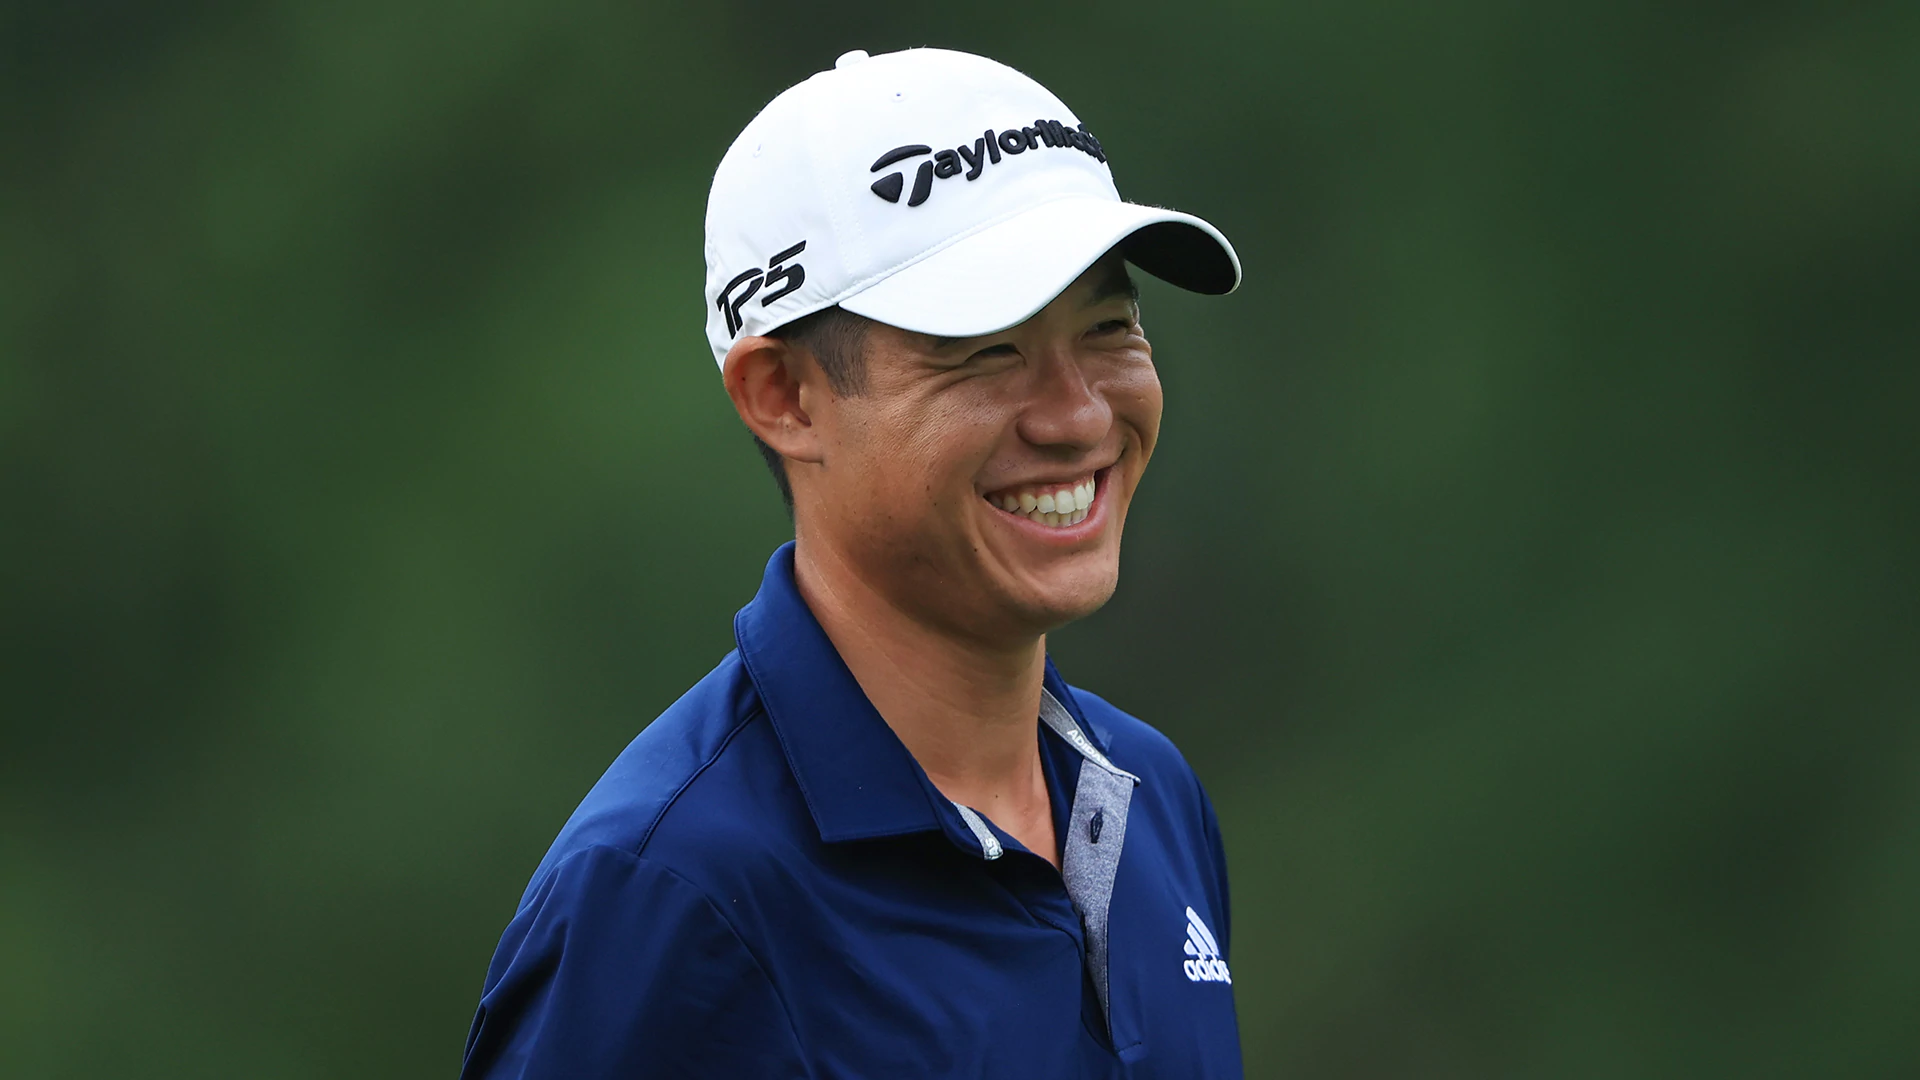 Collin Morikawa moves ahead of Tiger Woods in world rankings